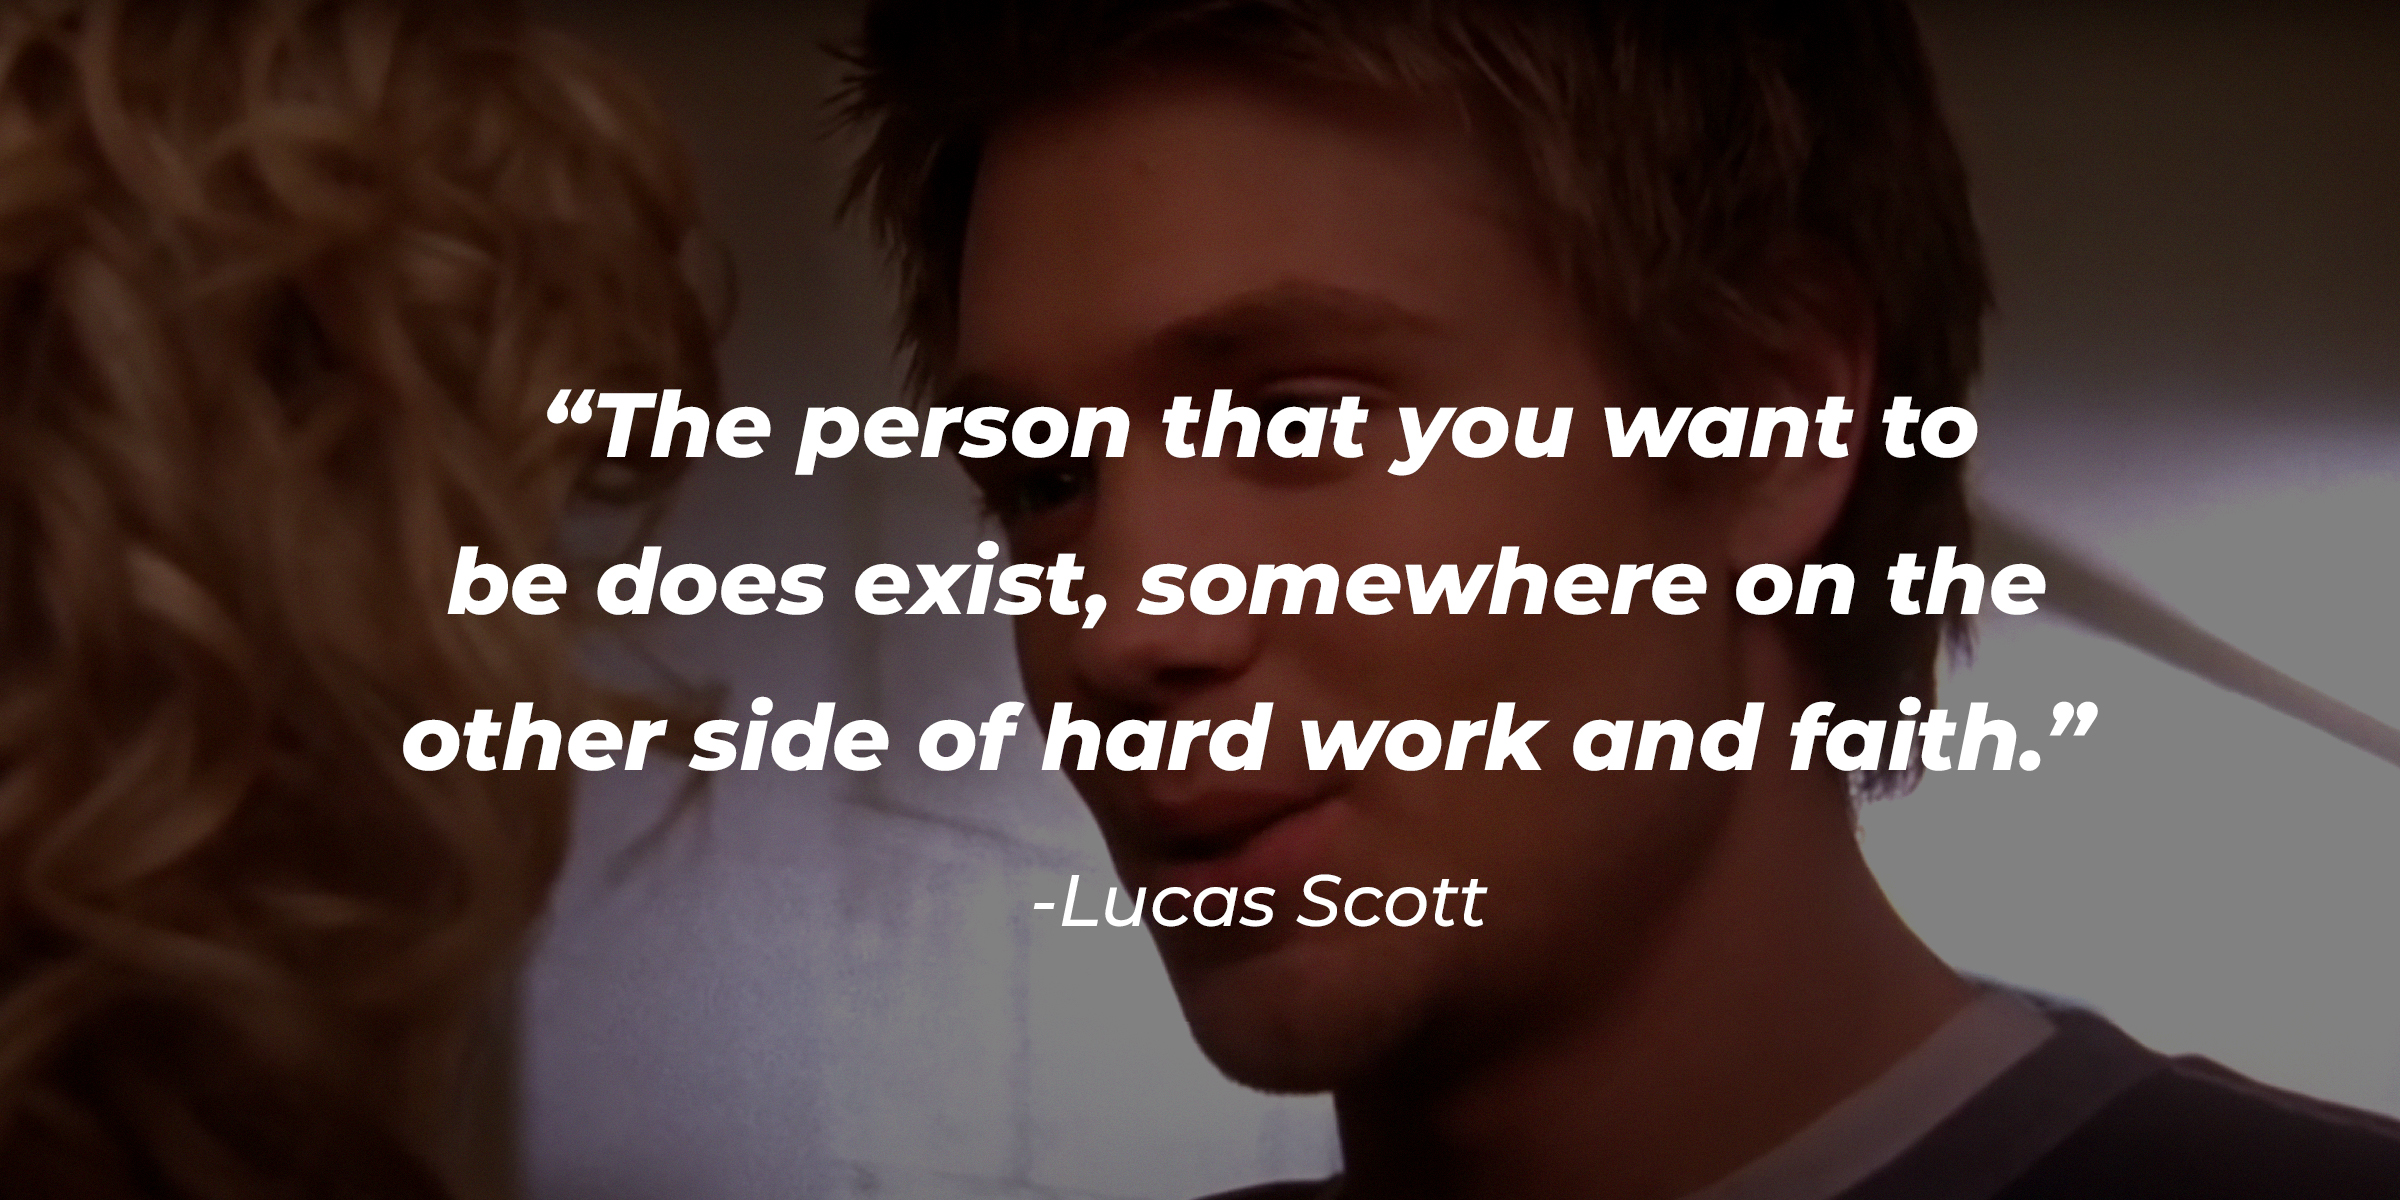 Lucas Scott, with his quote: "The person that you want to be does exist, somewhere on the other side of hard work and faith." | Source: facebook.com/OneTreeHill